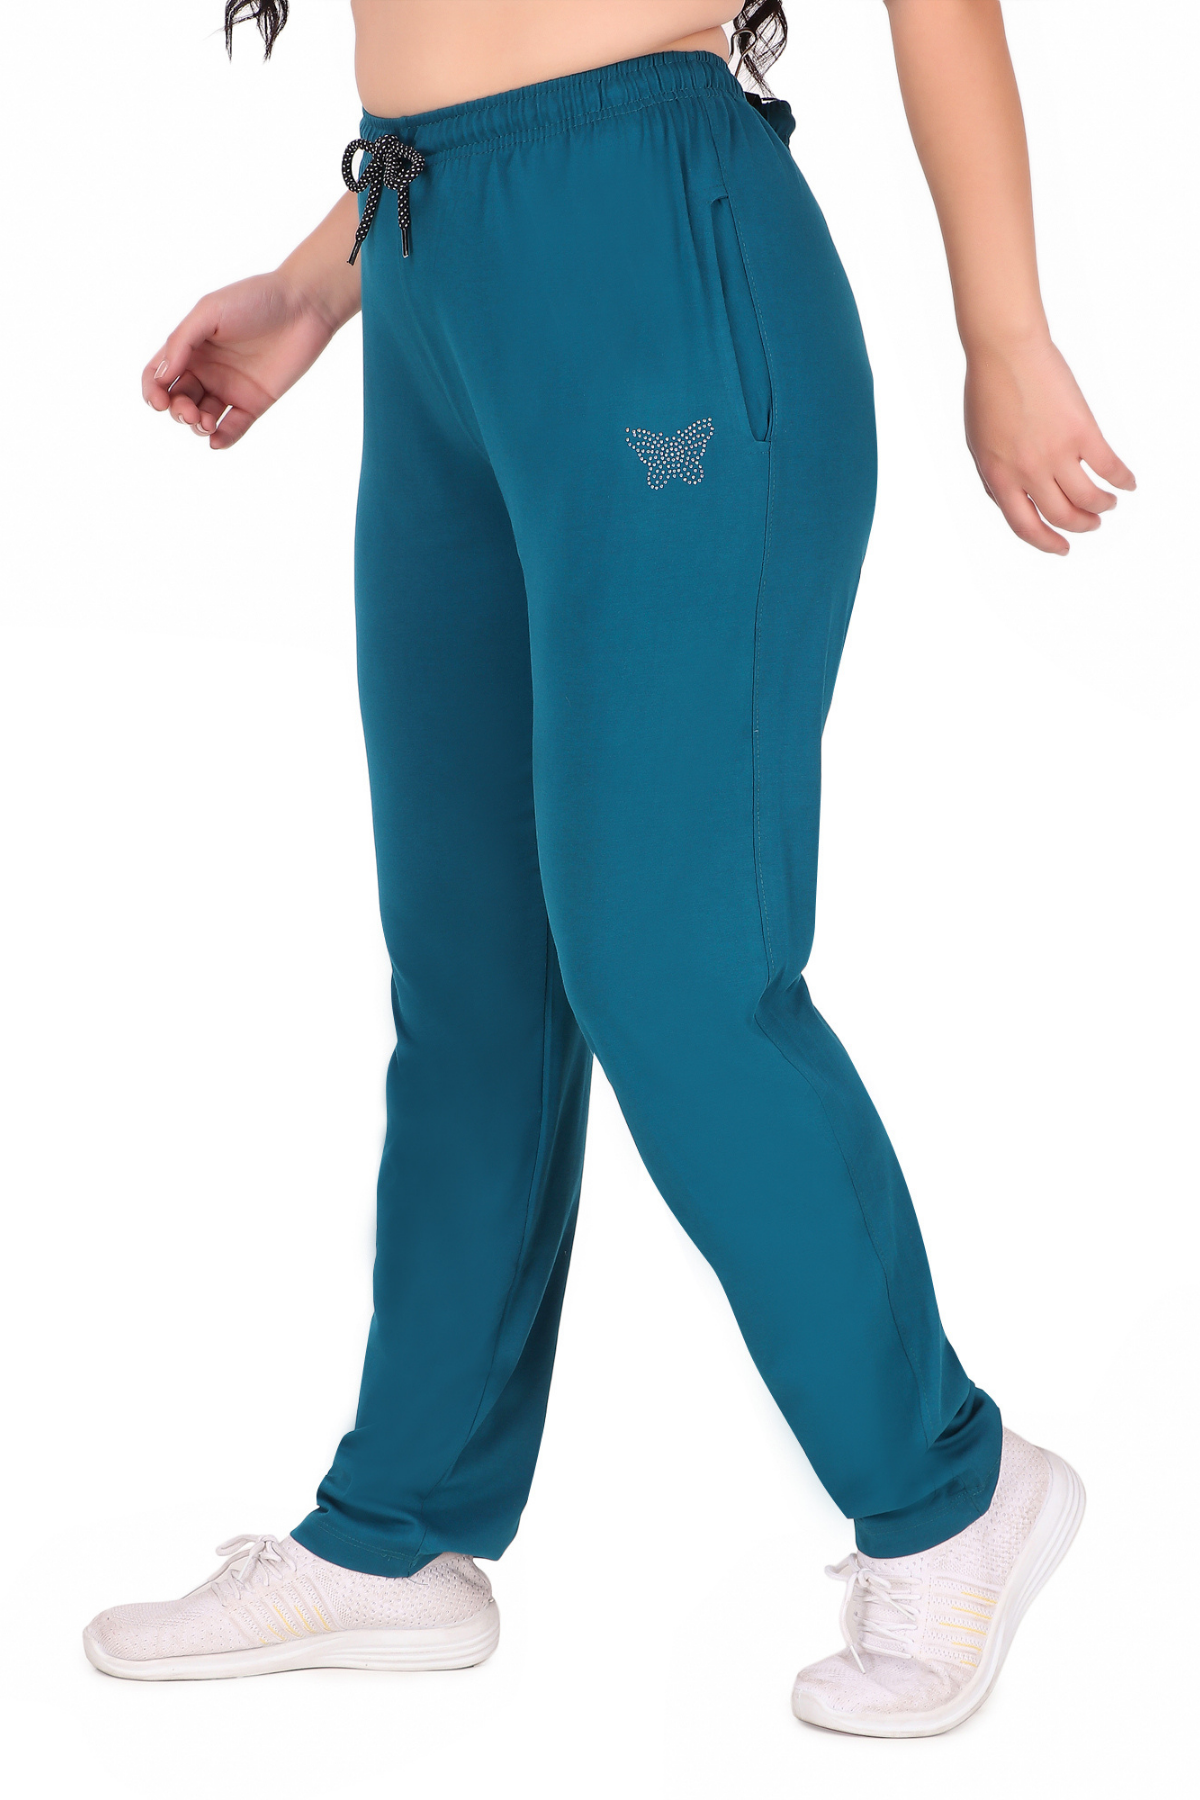 Comfy Teal Blue Cotton Track Pants For Women At Best Prices